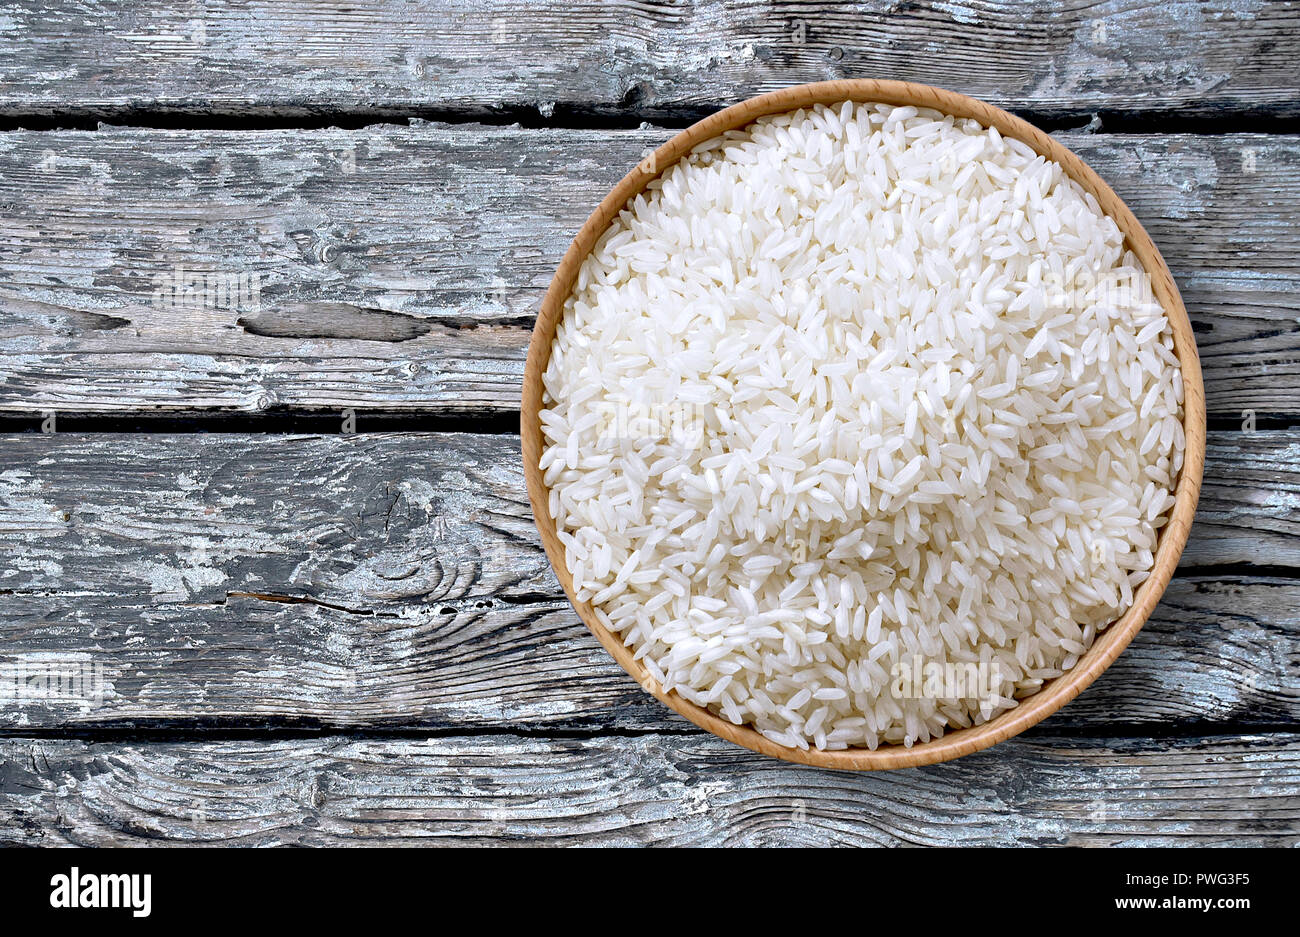 Healthy eating scene with raw, parboiled rice in a wooden bowl, top view or closeup shot on a weathered wooden table. Stock Photo